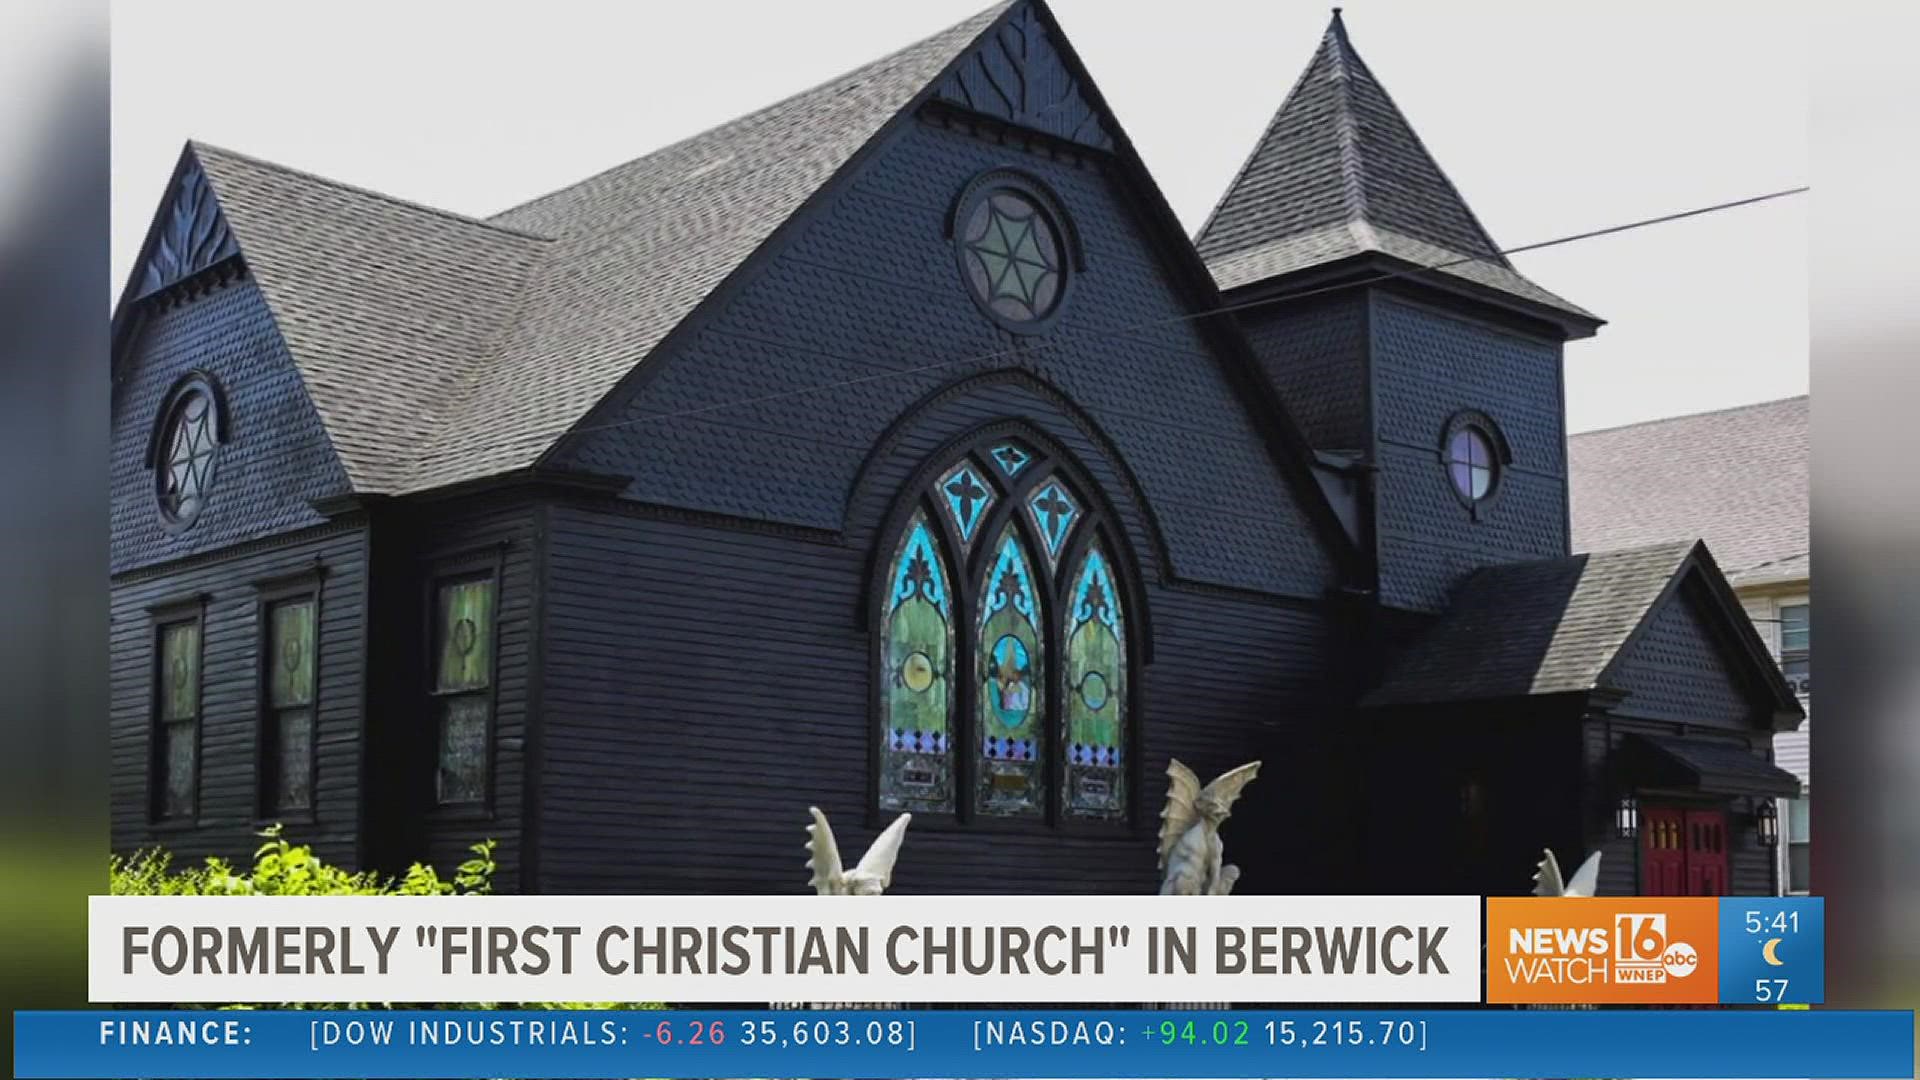 It's a not-so-typical home renovation in one part of Columbia County. A man has converted a once empty church into a place with Halloween vibes year-round.